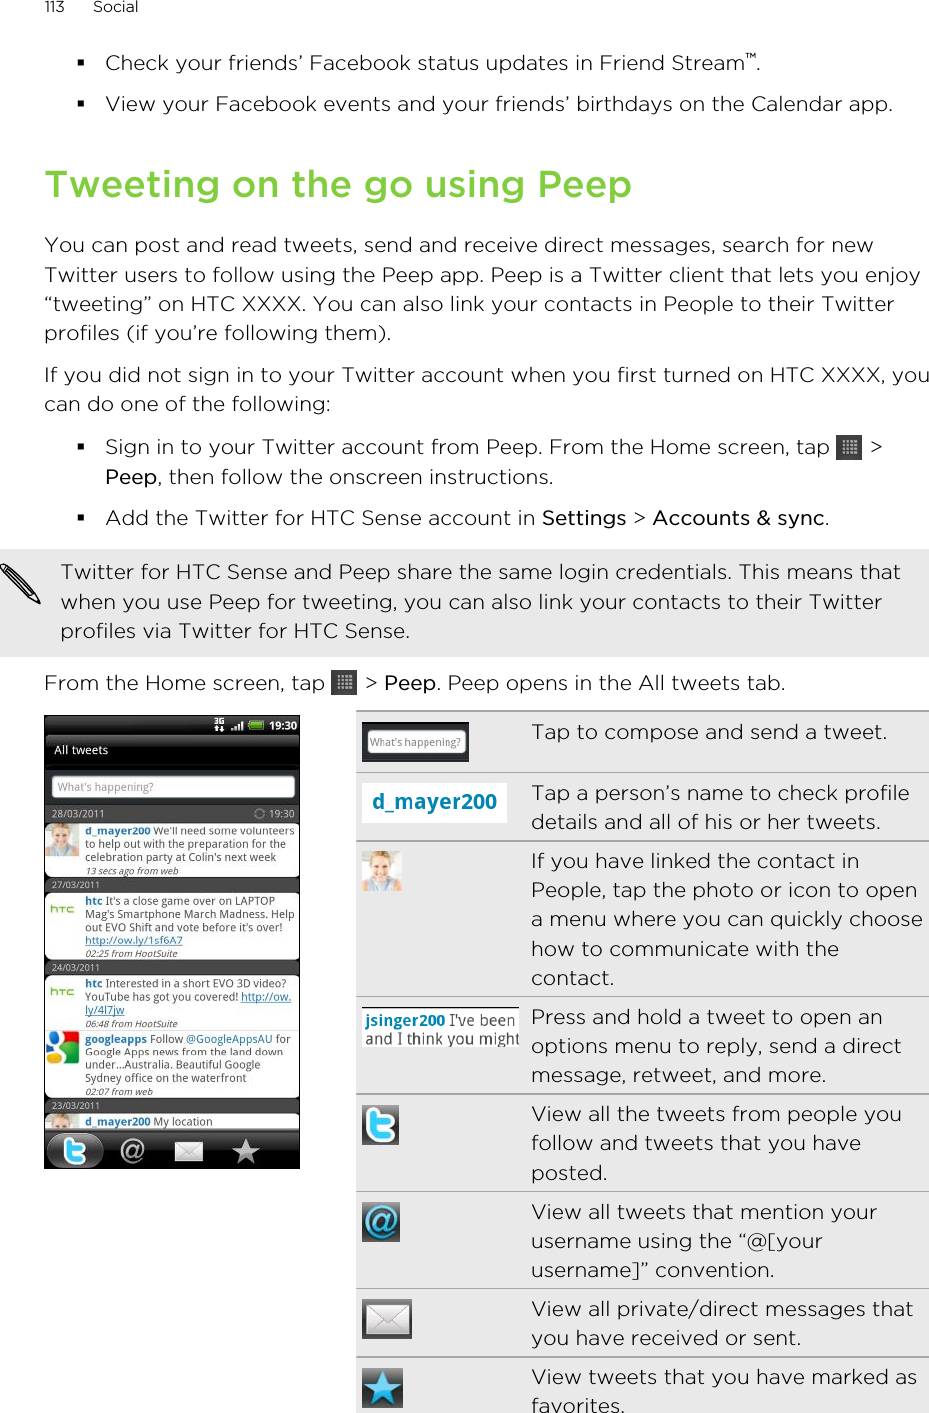 §Check your friends’ Facebook status updates in Friend Stream™.§View your Facebook events and your friends’ birthdays on the Calendar app.Tweeting on the go using PeepYou can post and read tweets, send and receive direct messages, search for newTwitter users to follow using the Peep app. Peep is a Twitter client that lets you enjoy“tweeting” on HTC XXXX. You can also link your contacts in People to their Twitterprofiles (if you’re following them).If you did not sign in to your Twitter account when you first turned on HTC XXXX, youcan do one of the following:§Sign in to your Twitter account from Peep. From the Home screen, tap   &gt;Peep, then follow the onscreen instructions.§Add the Twitter for HTC Sense account in Settings &gt; Accounts &amp; sync.Twitter for HTC Sense and Peep share the same login credentials. This means thatwhen you use Peep for tweeting, you can also link your contacts to their Twitterprofiles via Twitter for HTC Sense.From the Home screen, tap   &gt; Peep. Peep opens in the All tweets tab.Tap to compose and send a tweet.Tap a person’s name to check profiledetails and all of his or her tweets.If you have linked the contact inPeople, tap the photo or icon to opena menu where you can quickly choosehow to communicate with thecontact.Press and hold a tweet to open anoptions menu to reply, send a directmessage, retweet, and more.View all the tweets from people youfollow and tweets that you haveposted.View all tweets that mention yourusername using the “@[yourusername]” convention.View all private/direct messages thatyou have received or sent.View tweets that you have marked asfavorites.113 Social